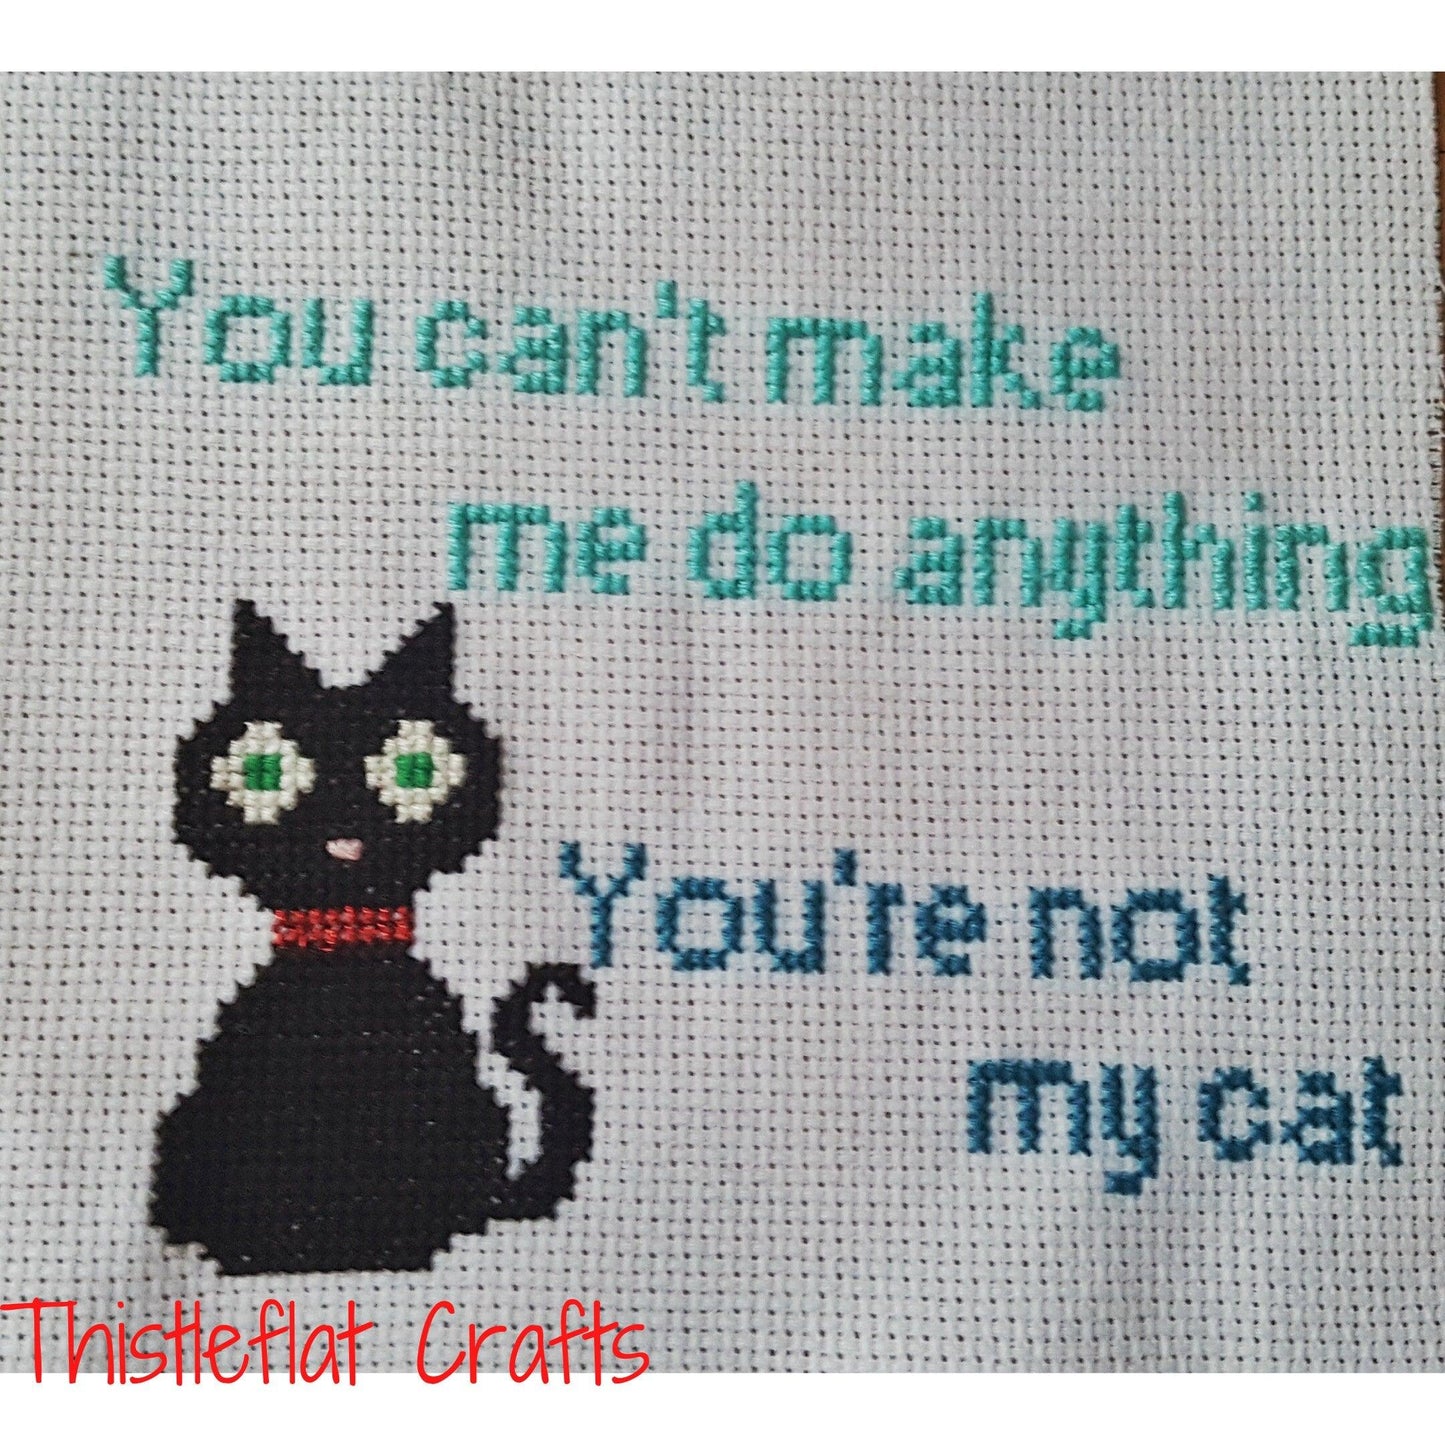 MADE TO ORDER - You can't tell me what to do you're not my cat, completed cross stitch quote